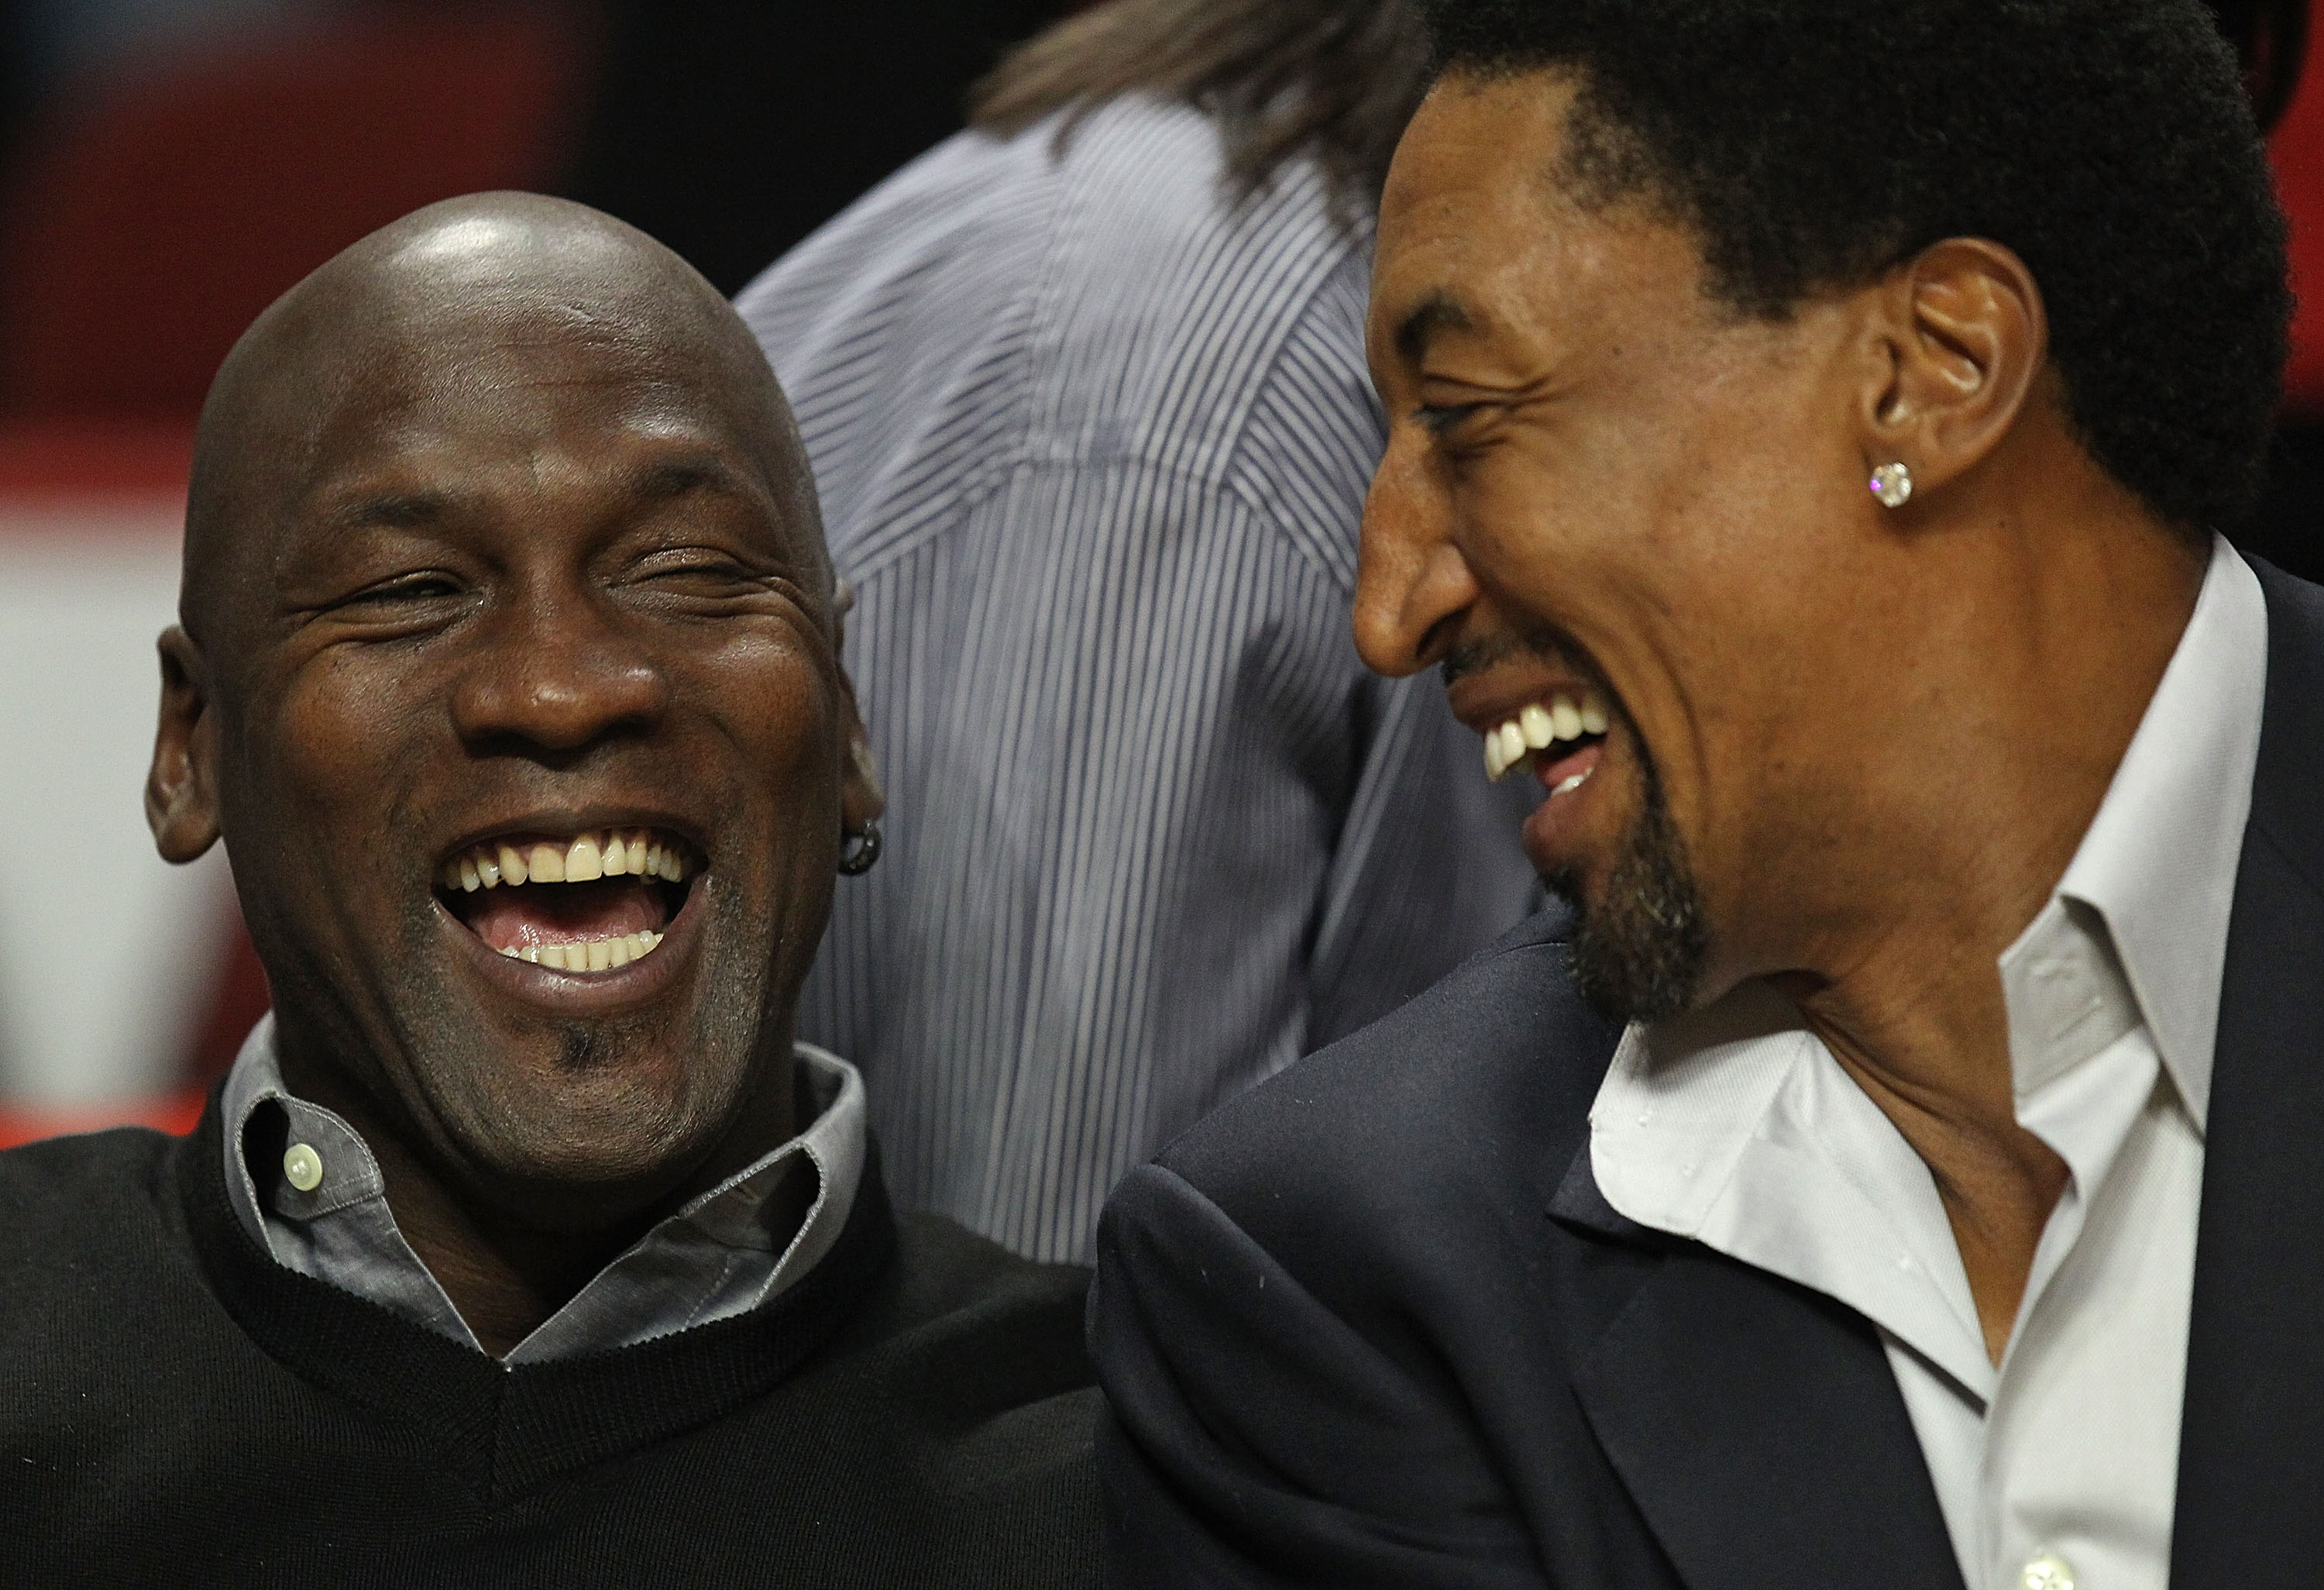 CHICAGO, IL - FEBRUARY 15: Former players Michael Jordan and Scottie Pippen of the Chicago Bulls share a laugh before a game between the Bulls and the Charlotte Bobcats at the United Center on February 15, 2011 in Chicago, Illinois. NOTE TO USER: User exp